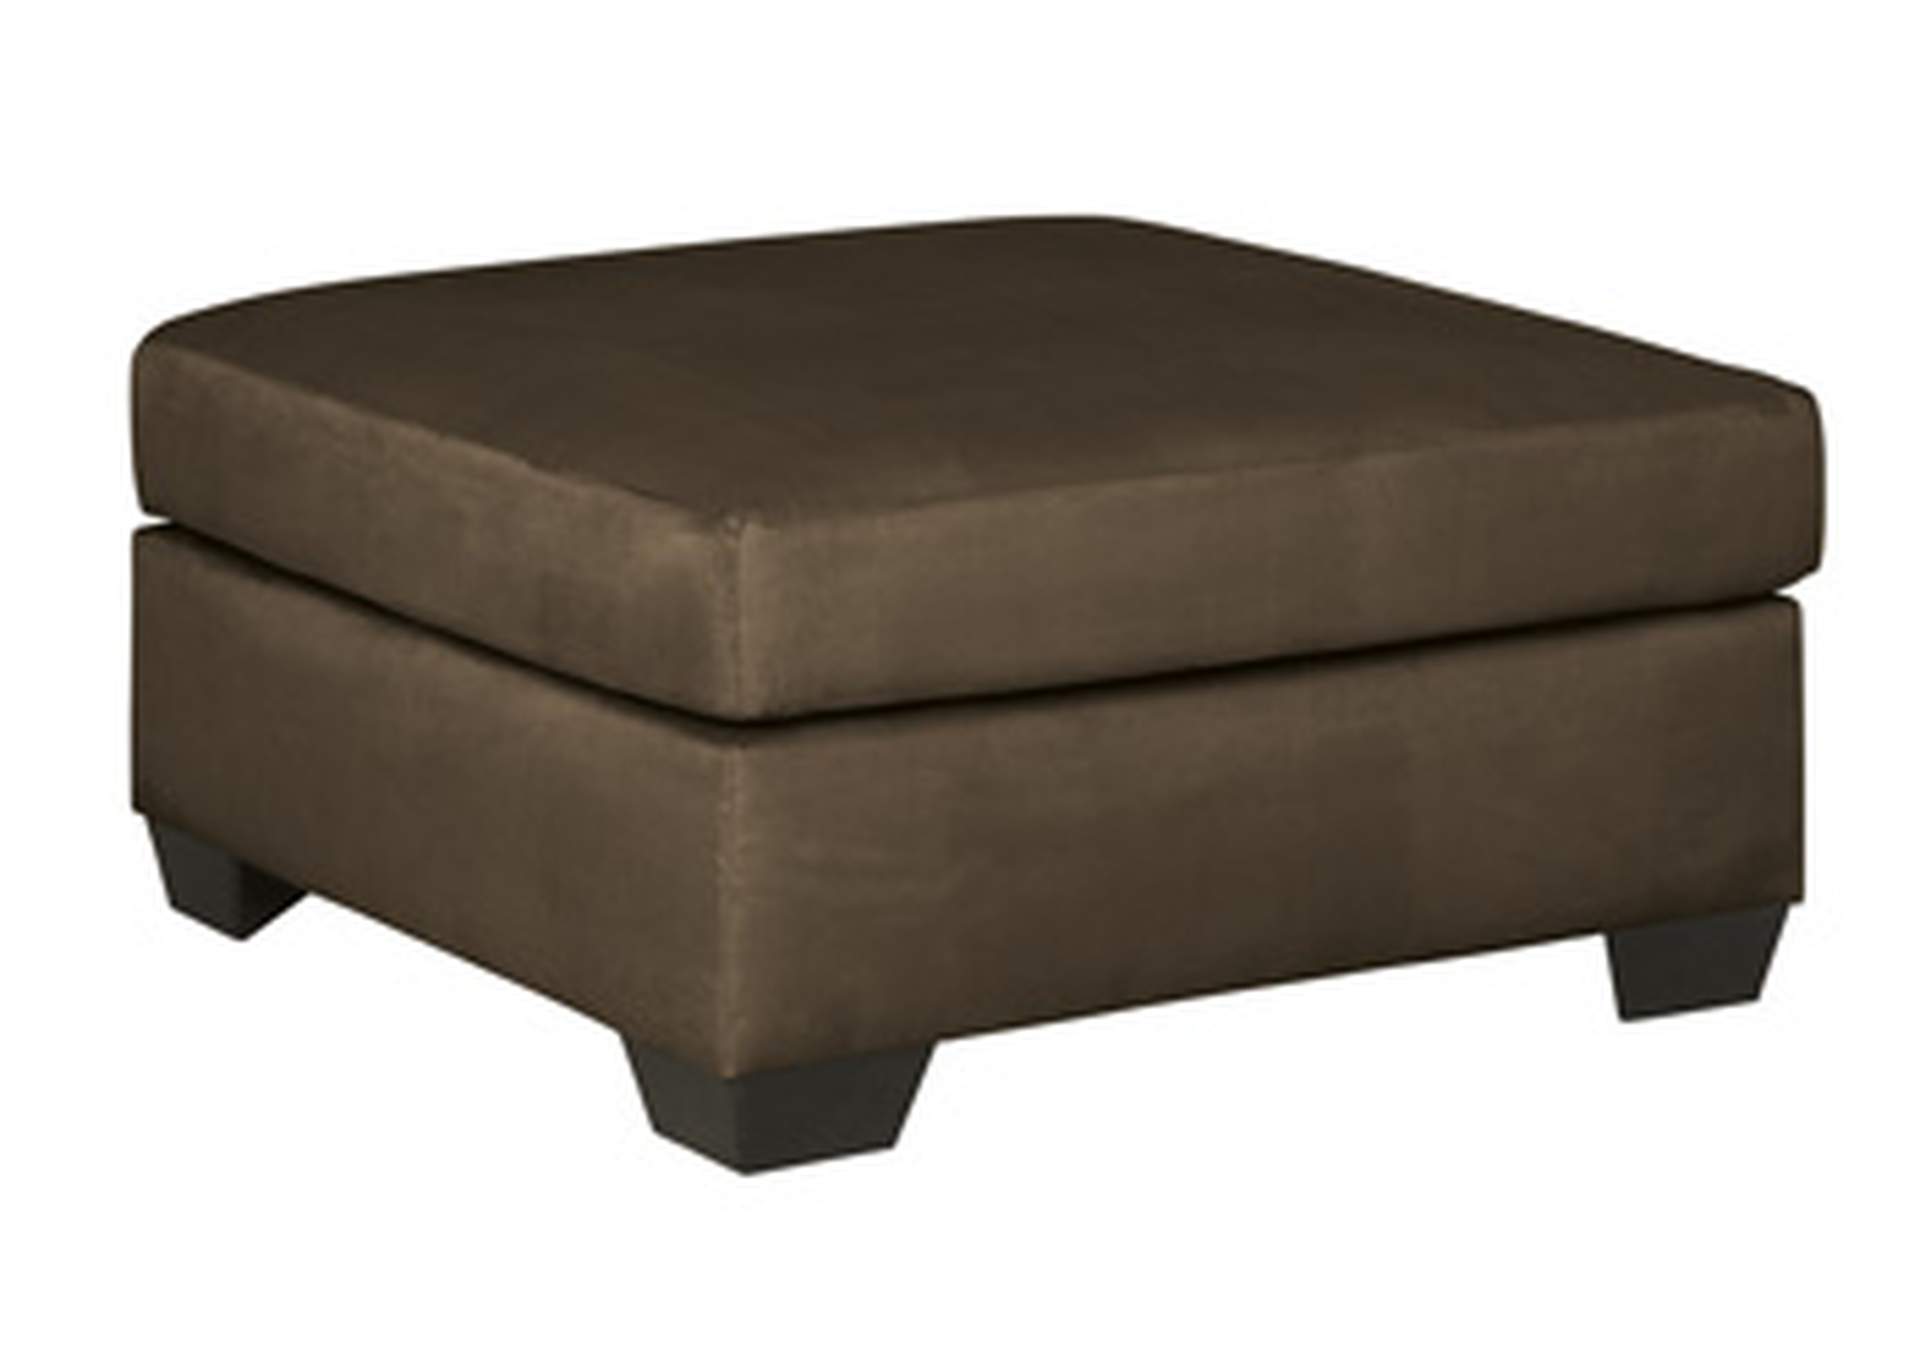 Darcy Oversized Accent Ottoman,Signature Design By Ashley